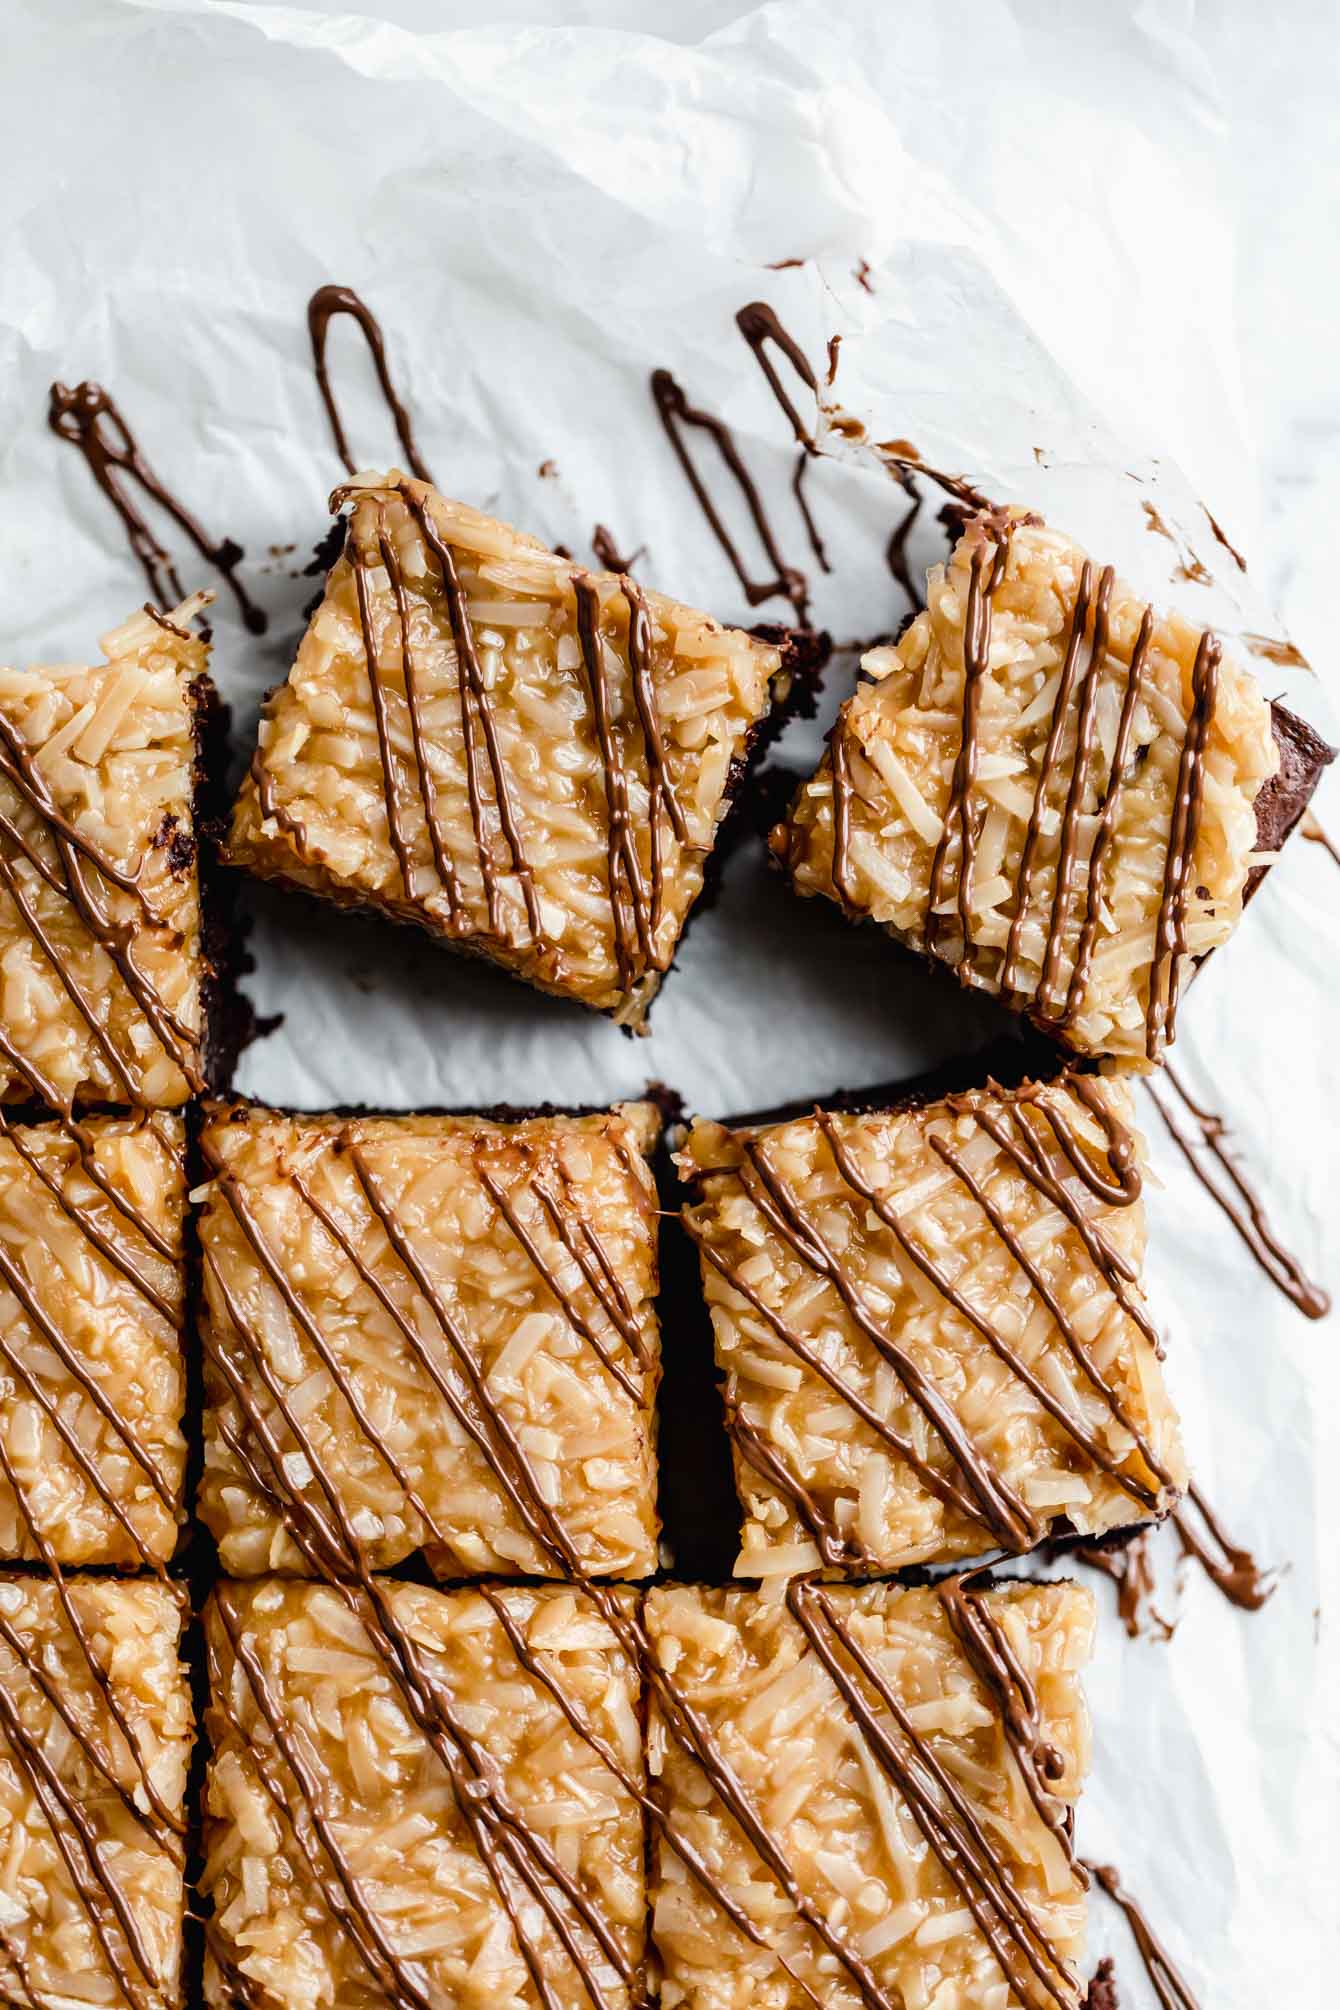 These Samoa brownies are fudgy brownies topped with homemade coconut caramel sauce and drizzled with chocolate. Perfect for any Girl Scout cookie lover!